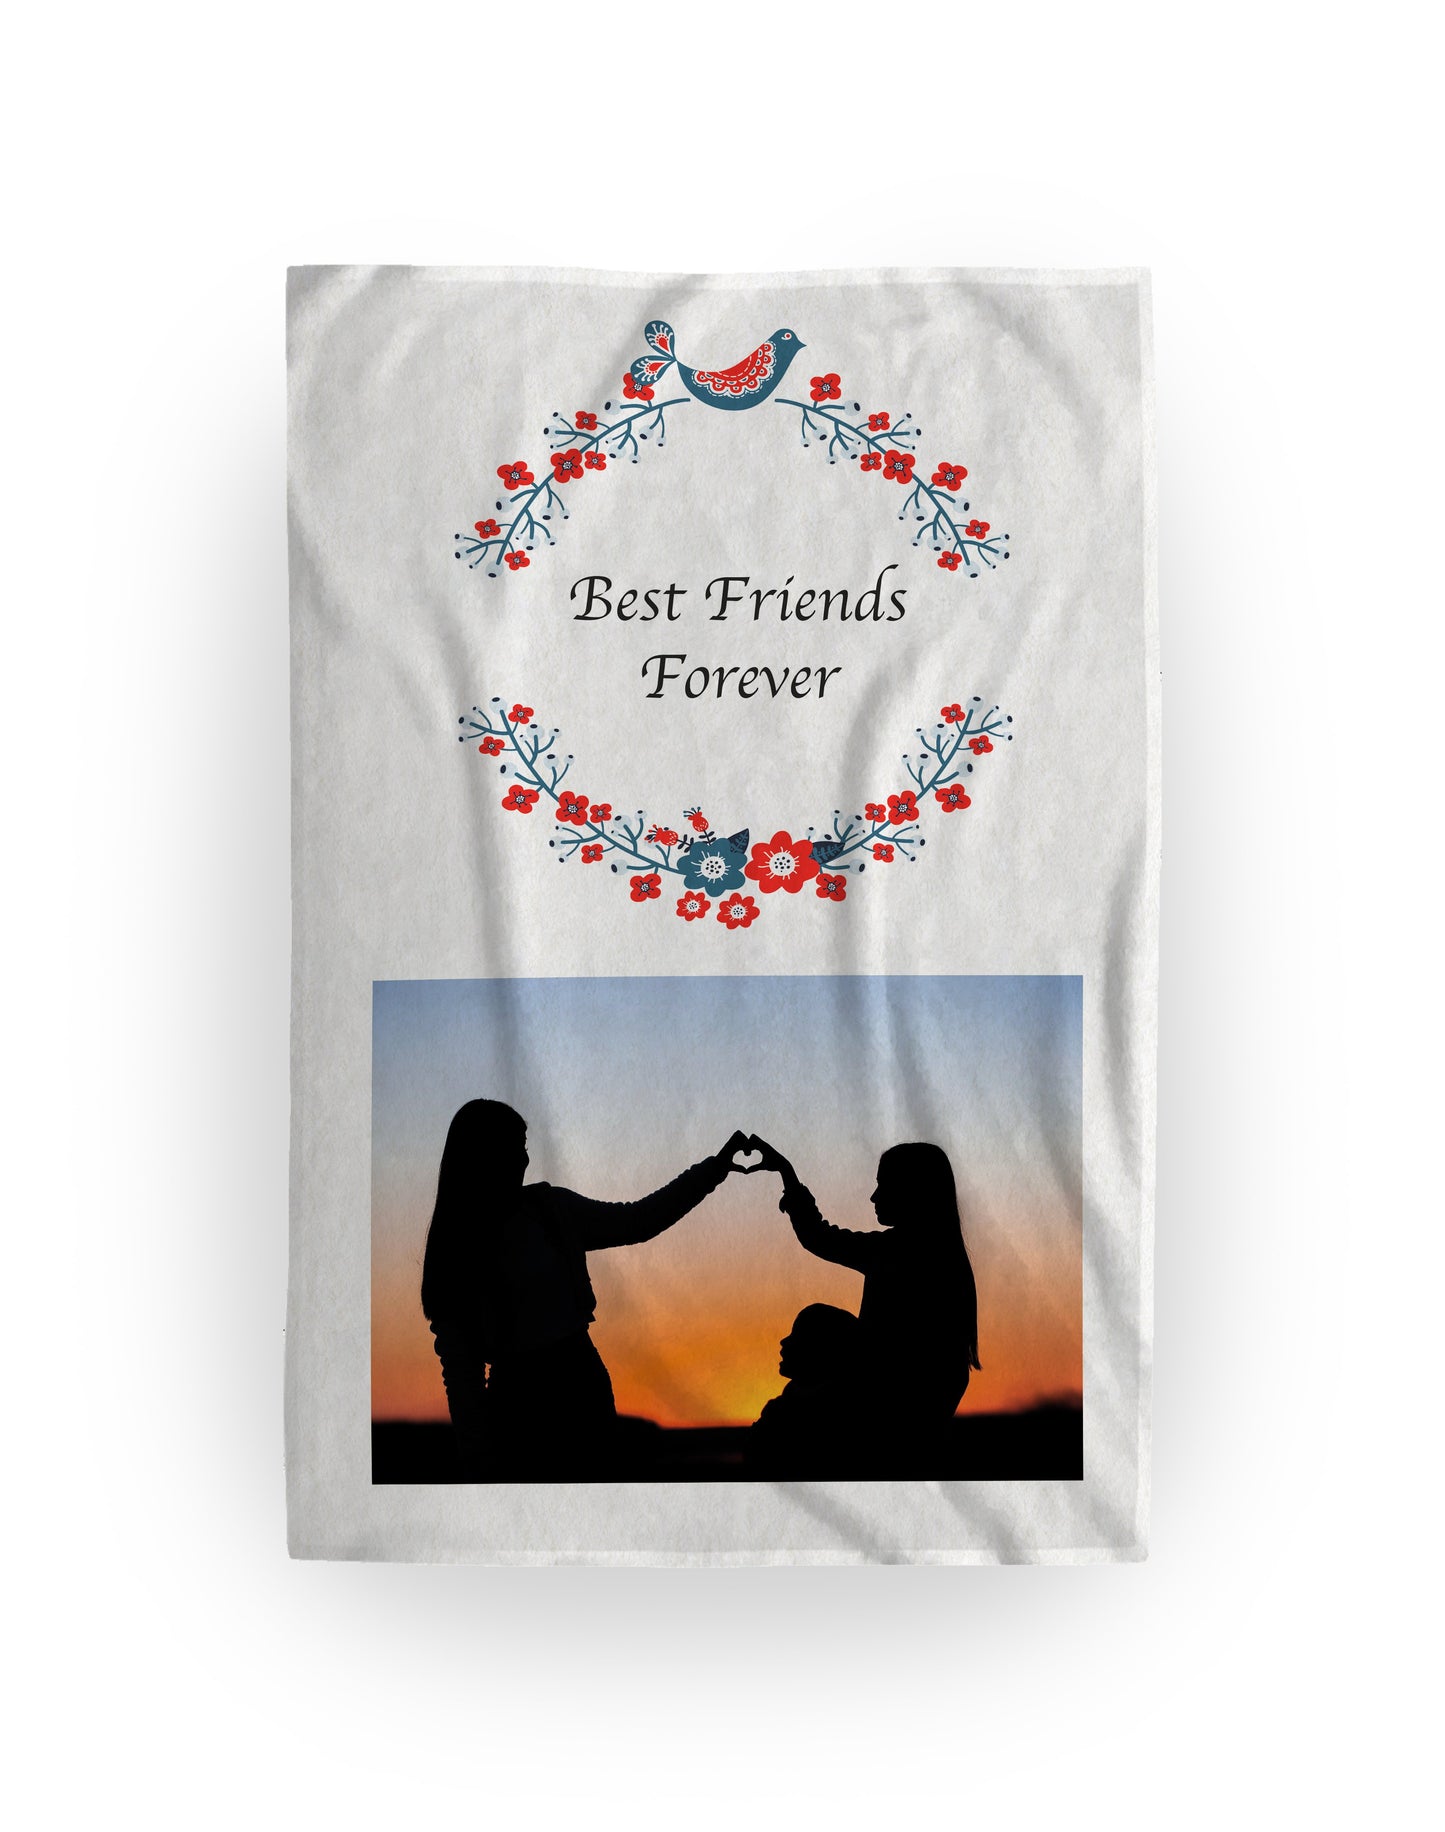 fleece blanket with personalised text and photo. flower pattern and friends photo on blanket.